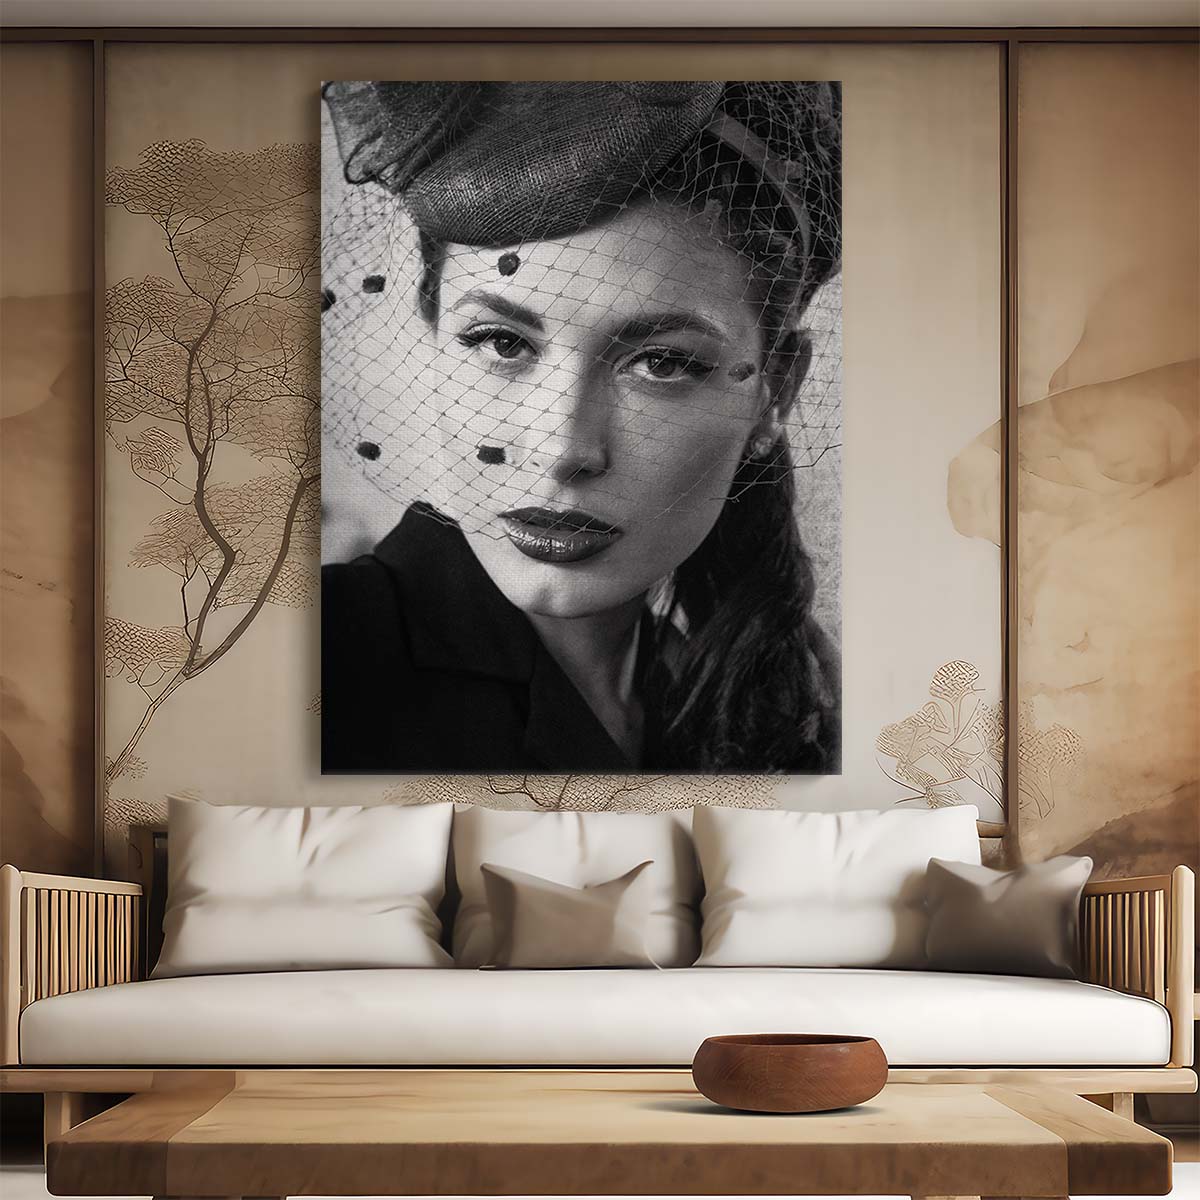 Elegant Vintage Woman Portrait in Monochrome - Nostalgic Figurative Photography by Luxuriance Designs, made in USA